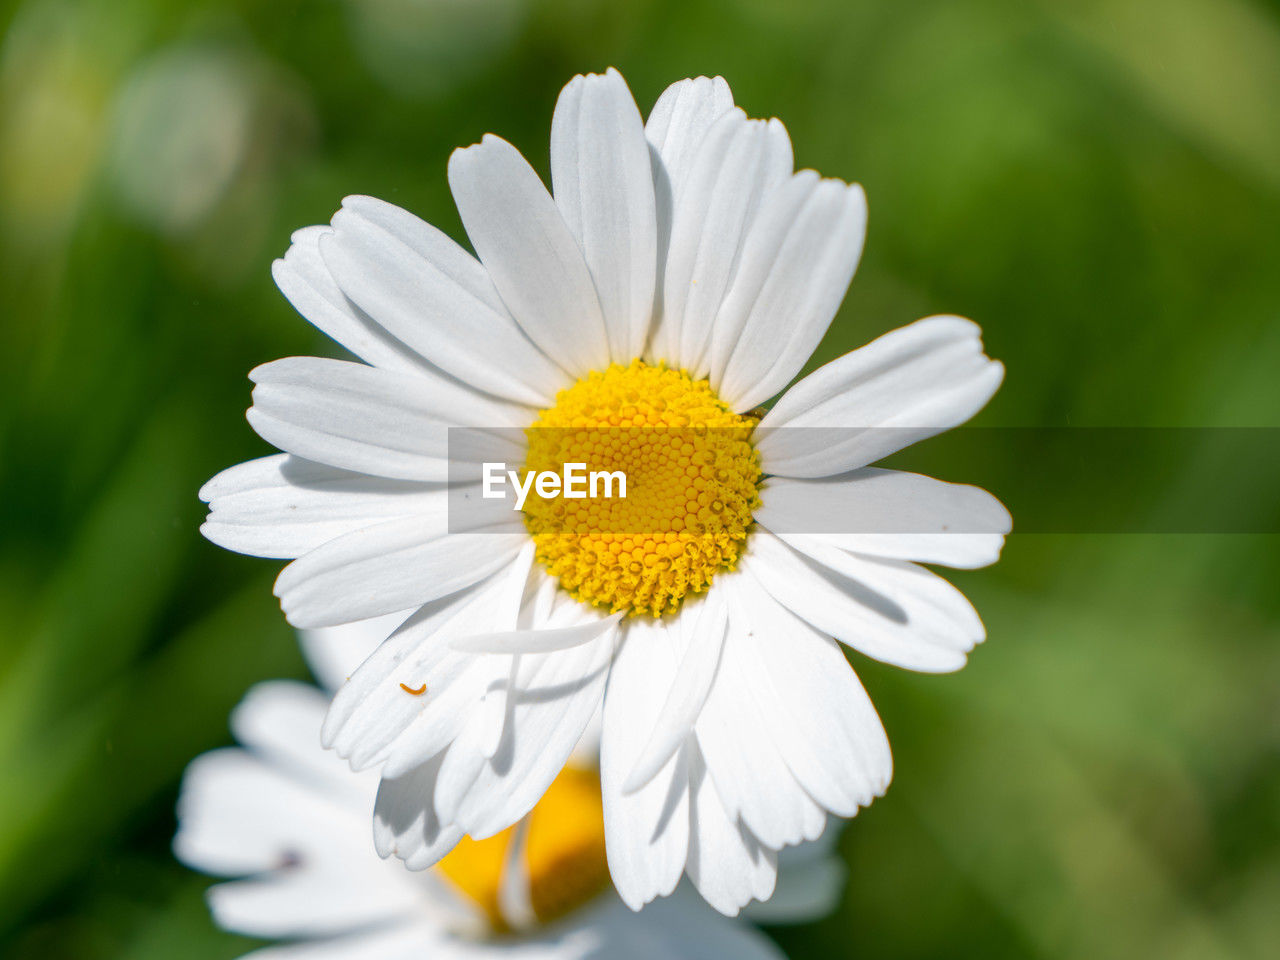 flower, flowering plant, plant, freshness, beauty in nature, flower head, petal, fragility, close-up, nature, daisy, inflorescence, growth, white, macro photography, yellow, pollen, summer, springtime, botany, outdoors, focus on foreground, wildflower, no people, blossom, meadow, macro, environment, selective focus, grass, day, tranquility, green, plant stem